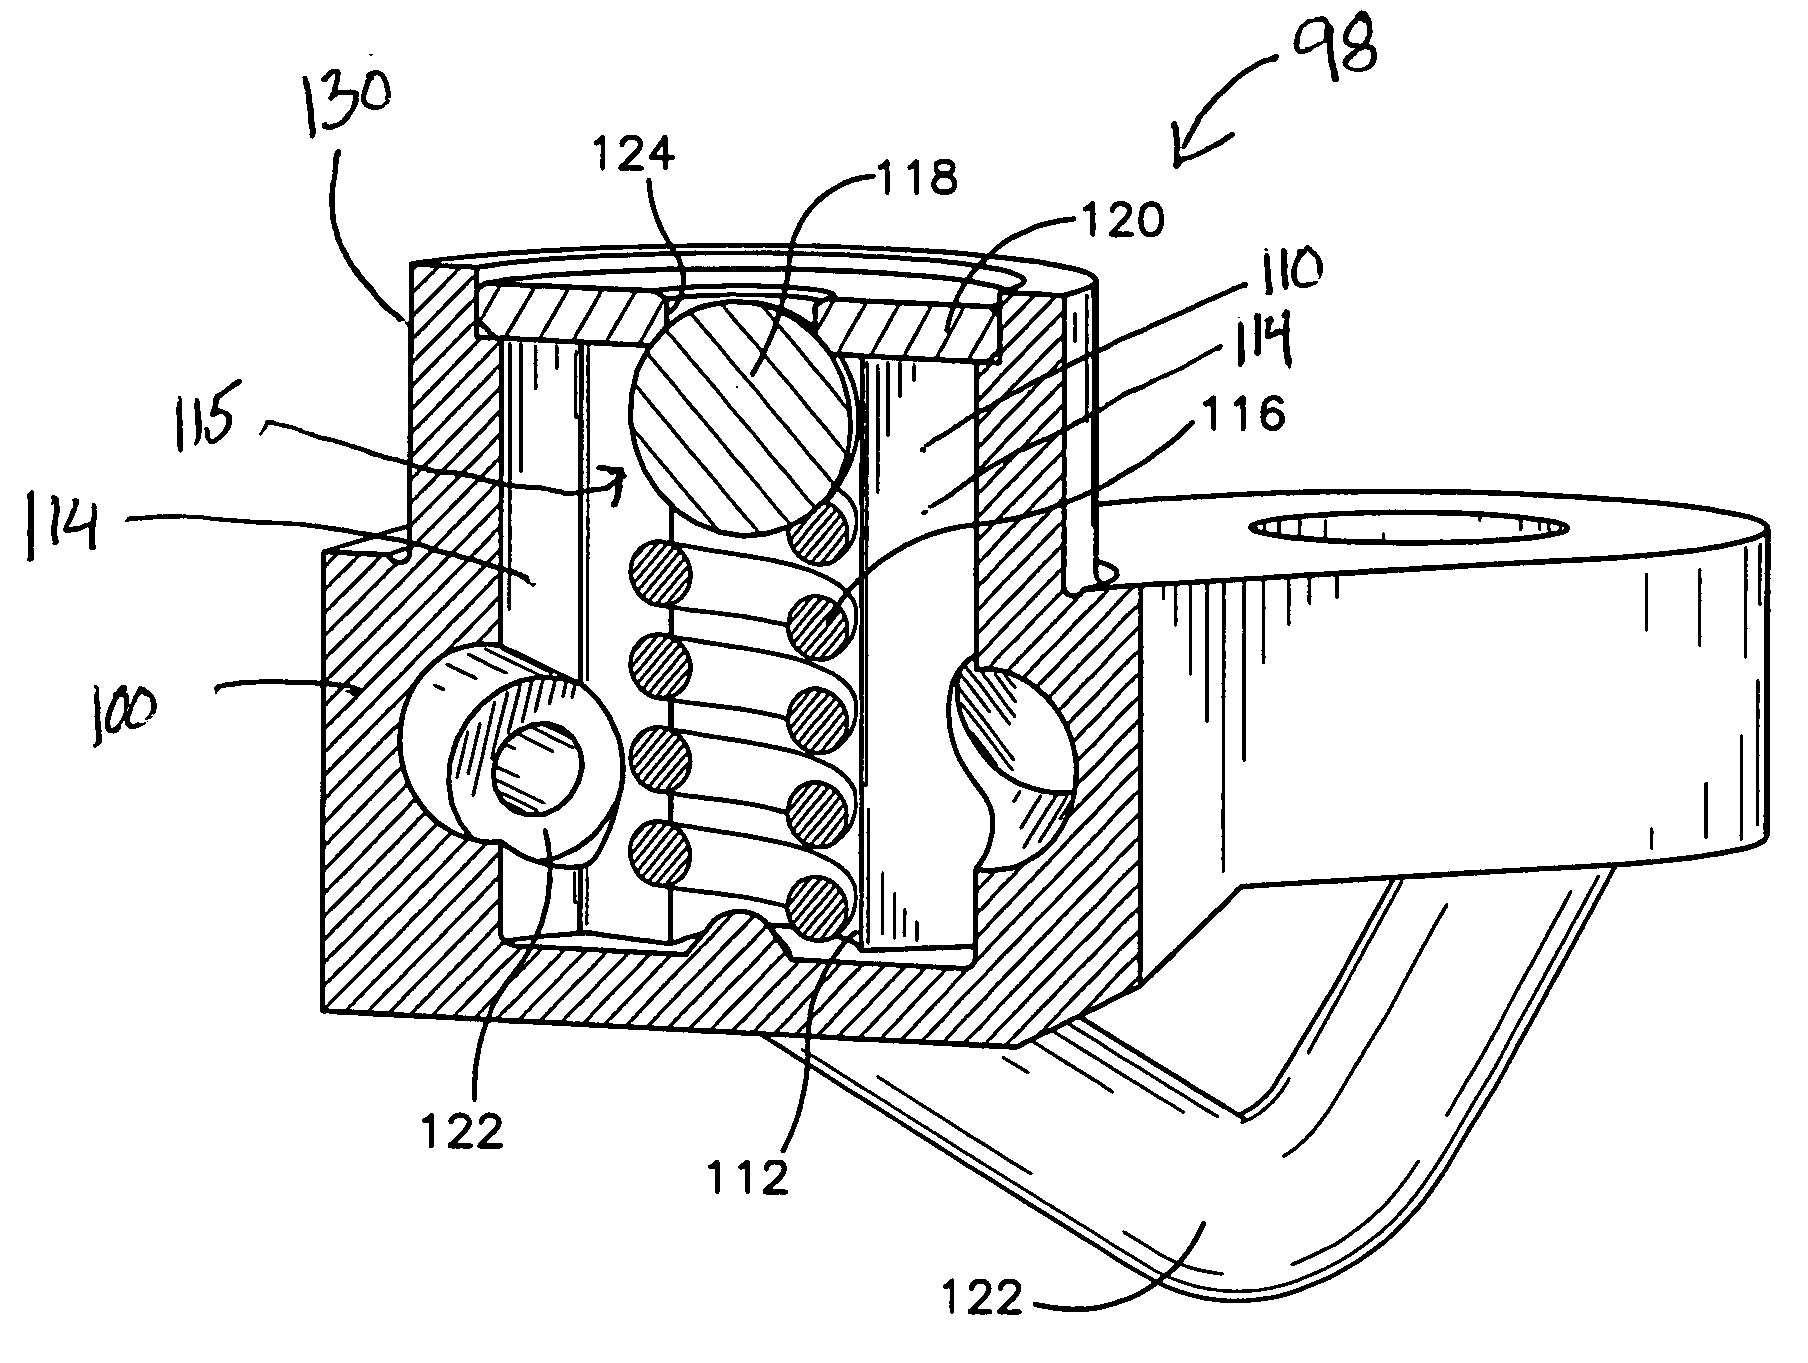 Fluid jet for providing fluid under pressure to a desired location